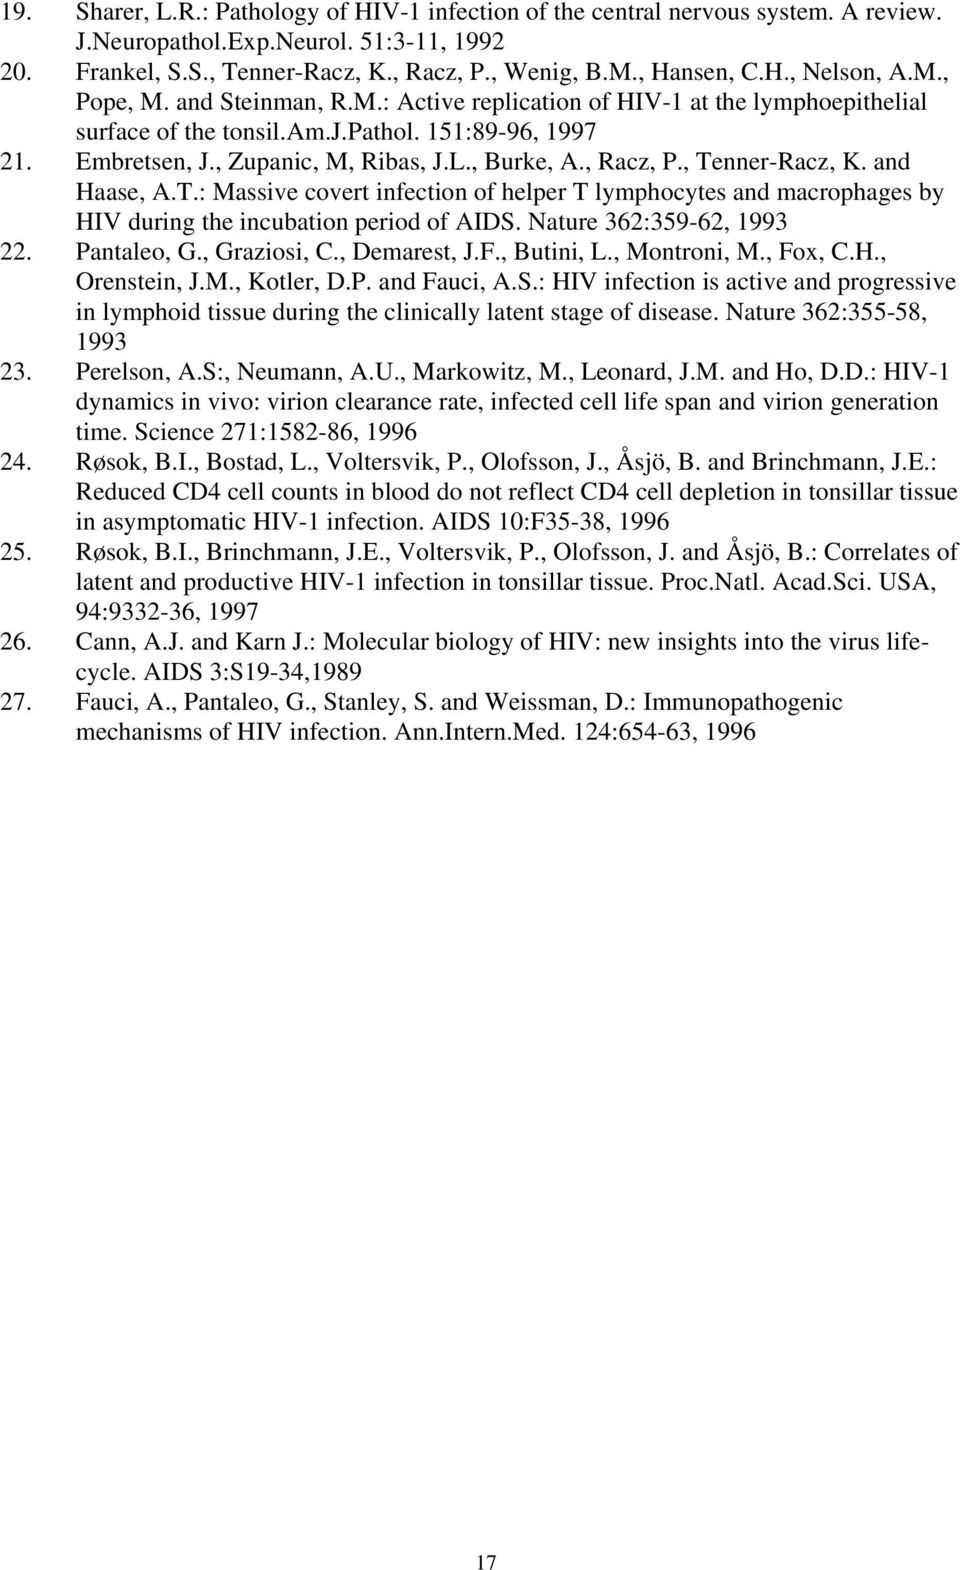 , Tenner-Racz, K. and Haase, A.T.: Massive covert infection of helper T lymphocytes and macrophages by HIV during the incubation period of AIDS. Nature 362:359-62, 1993 22. Pantaleo, G., Graziosi, C.